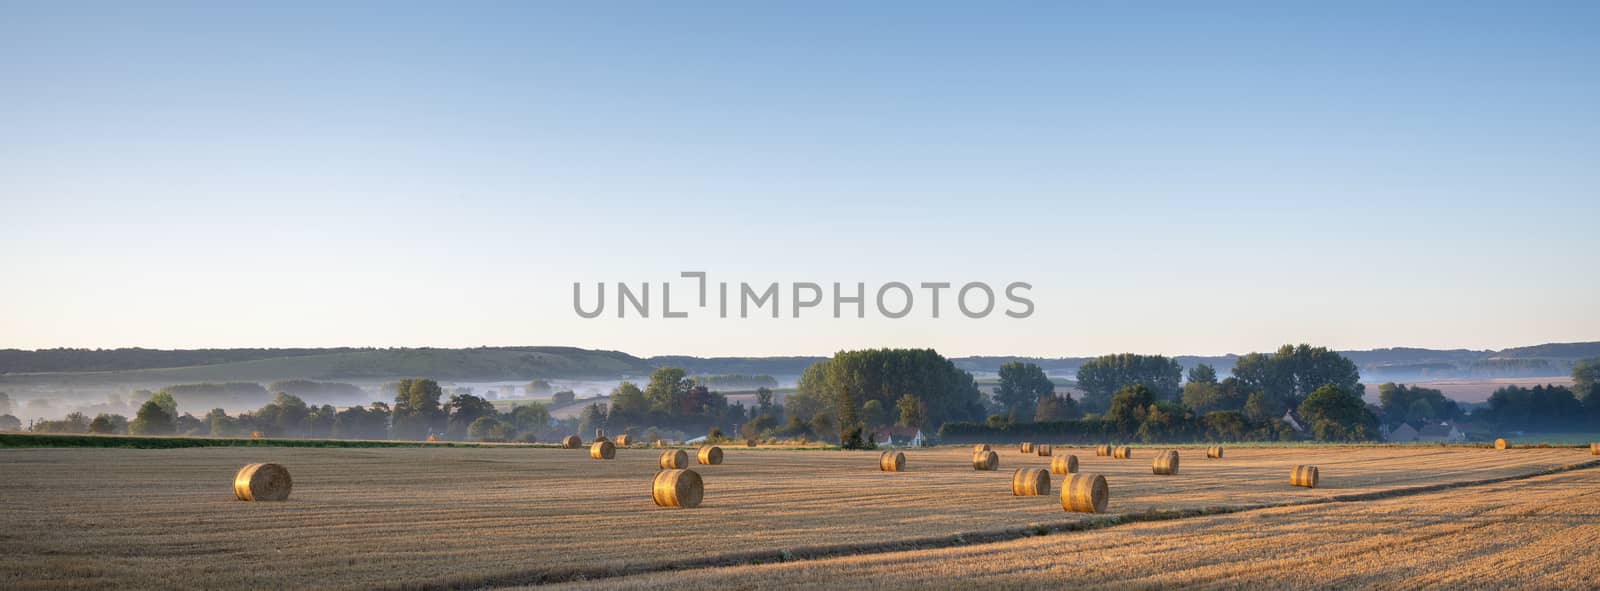 golden straw bales in early morning light on countryside of french normandy near calais and boulogne in parc naturel des caps et marais d’opale